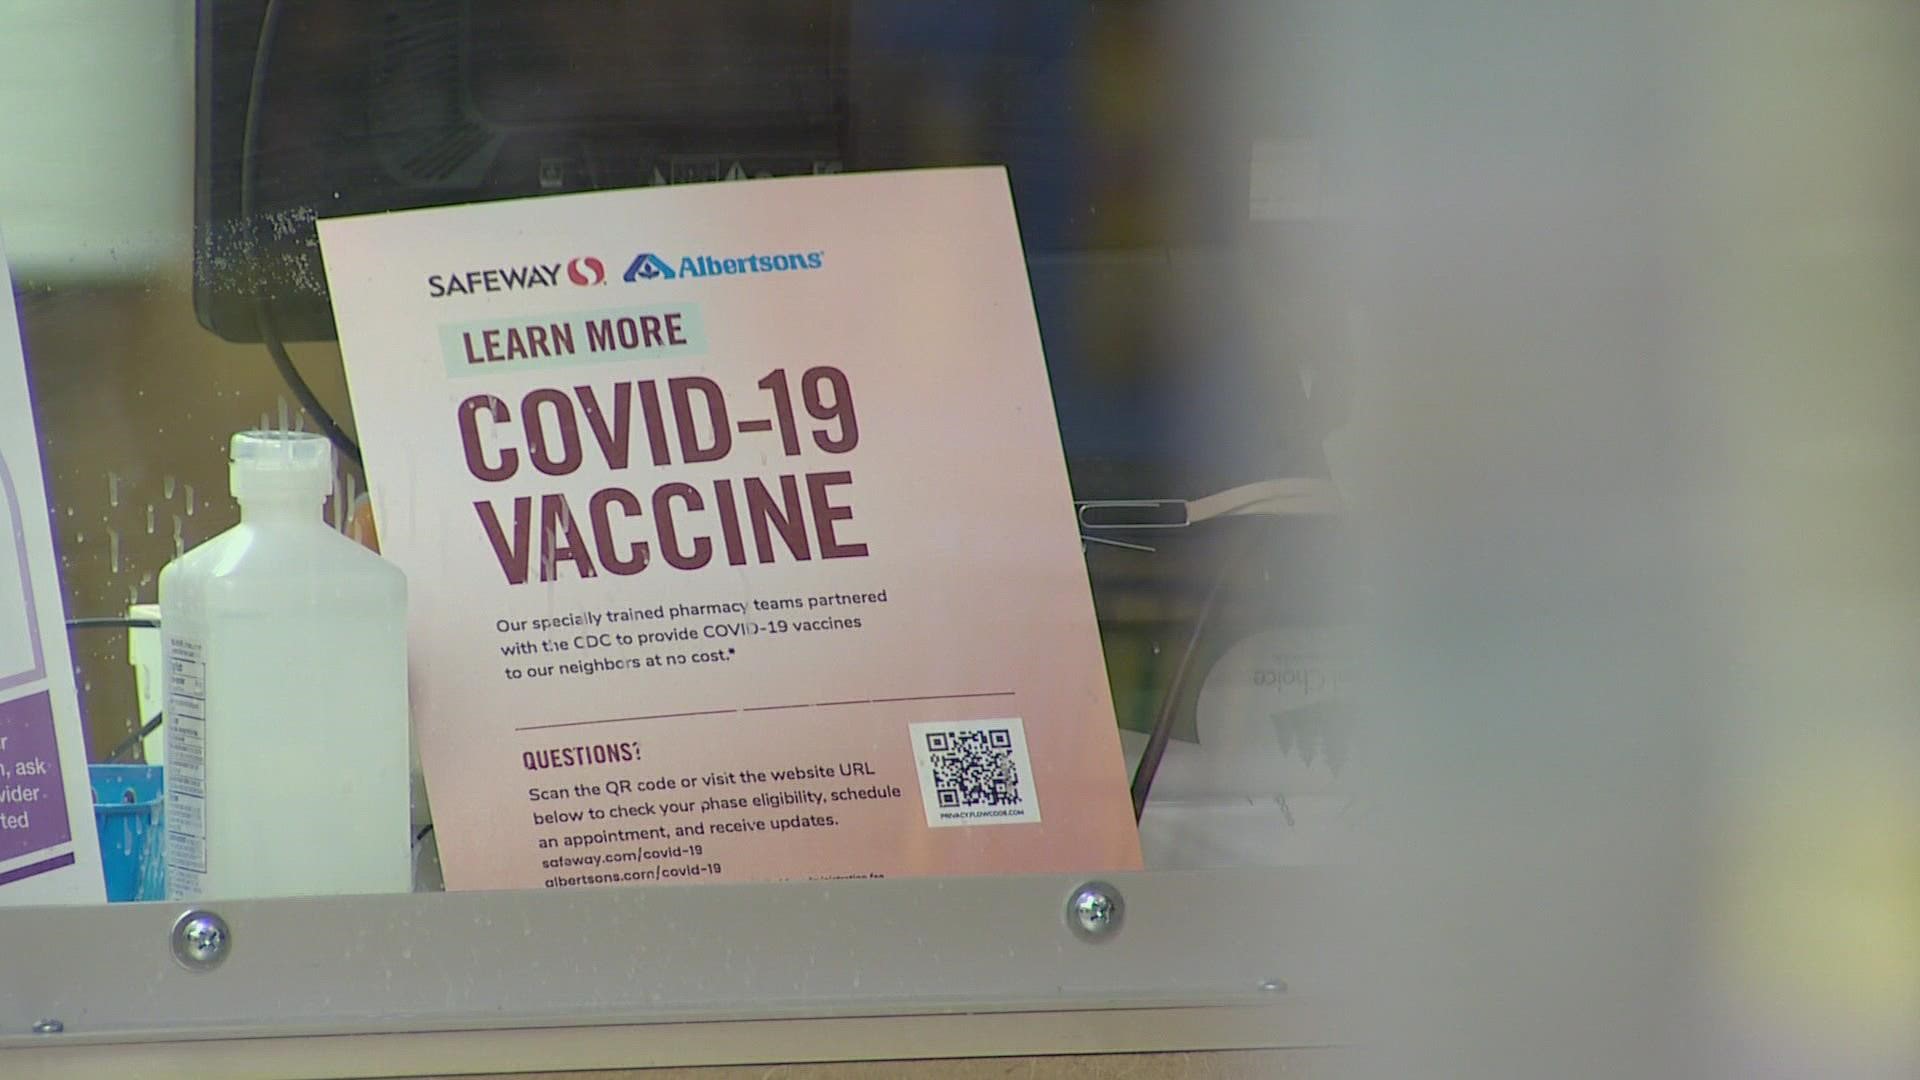 About 88% of Washington state’s hospital staff will be fully vaccinated against COVID-19 in time for the mandate deadline of Oct. 18, according to a recent survey.